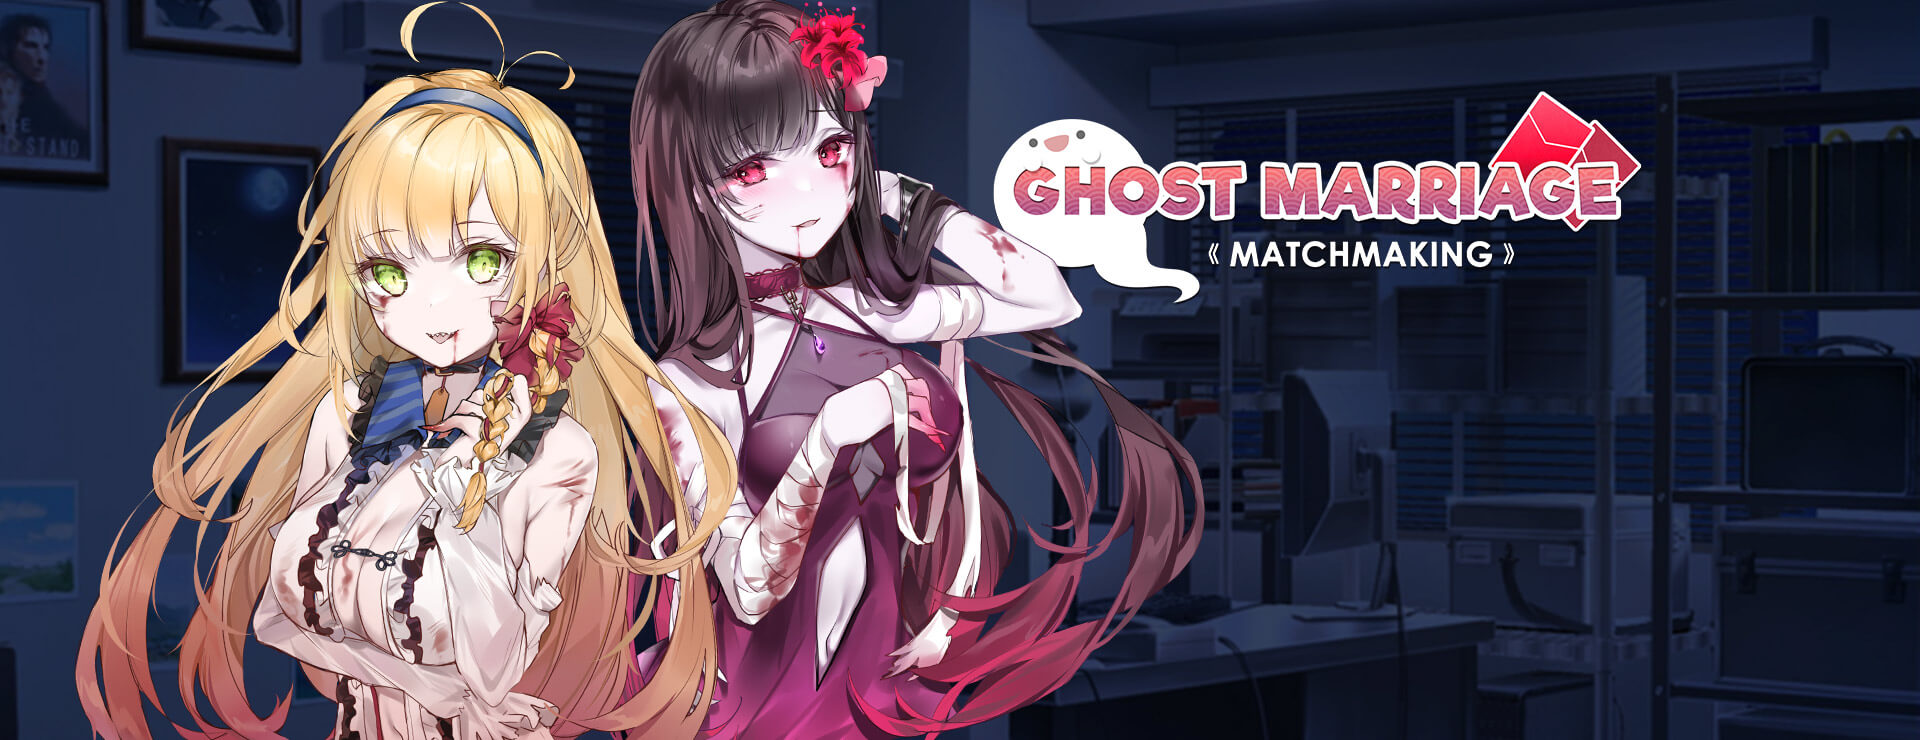 Ghost Marriage Matchmaking - RPG Game